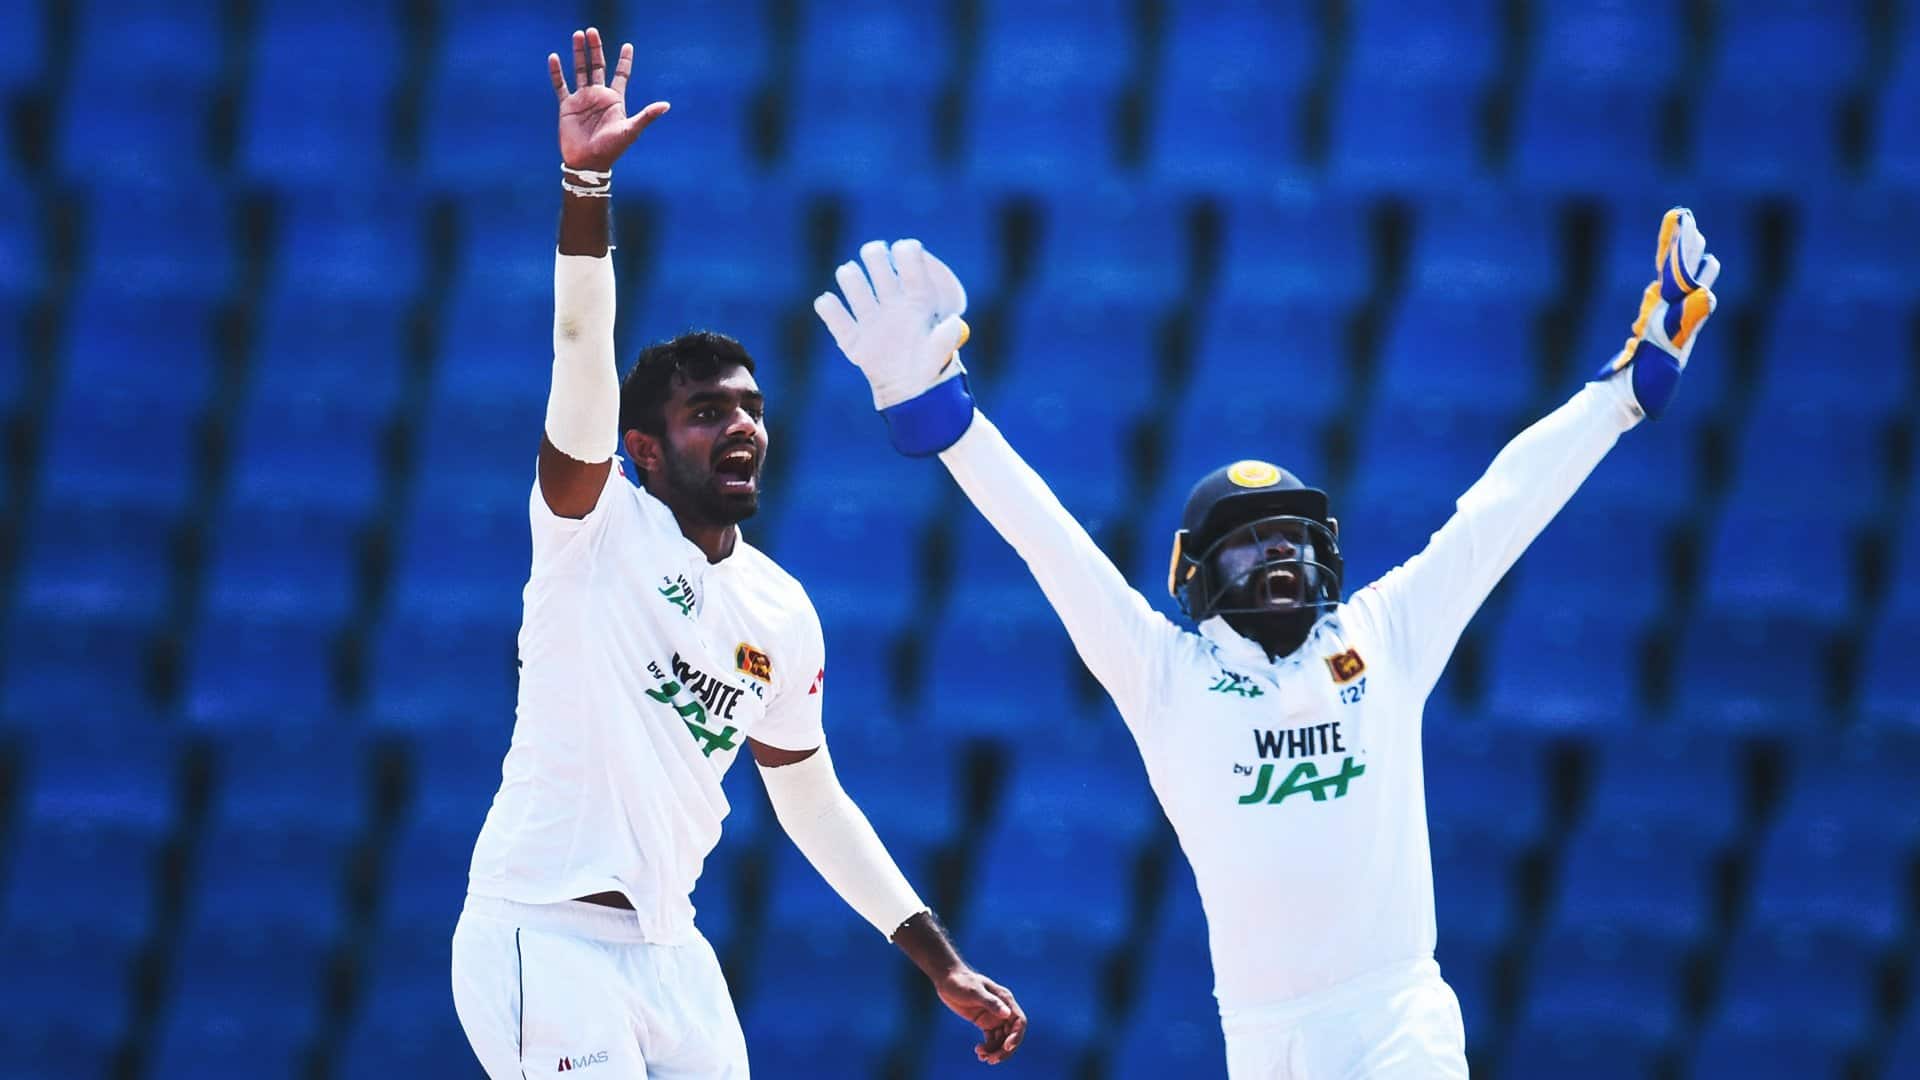 Sri Lanka's left-arm spinner Lasith Embuldeniya celebrates after taking a wicket on Day 1 of the 2nd Test. (Source: Twitter)